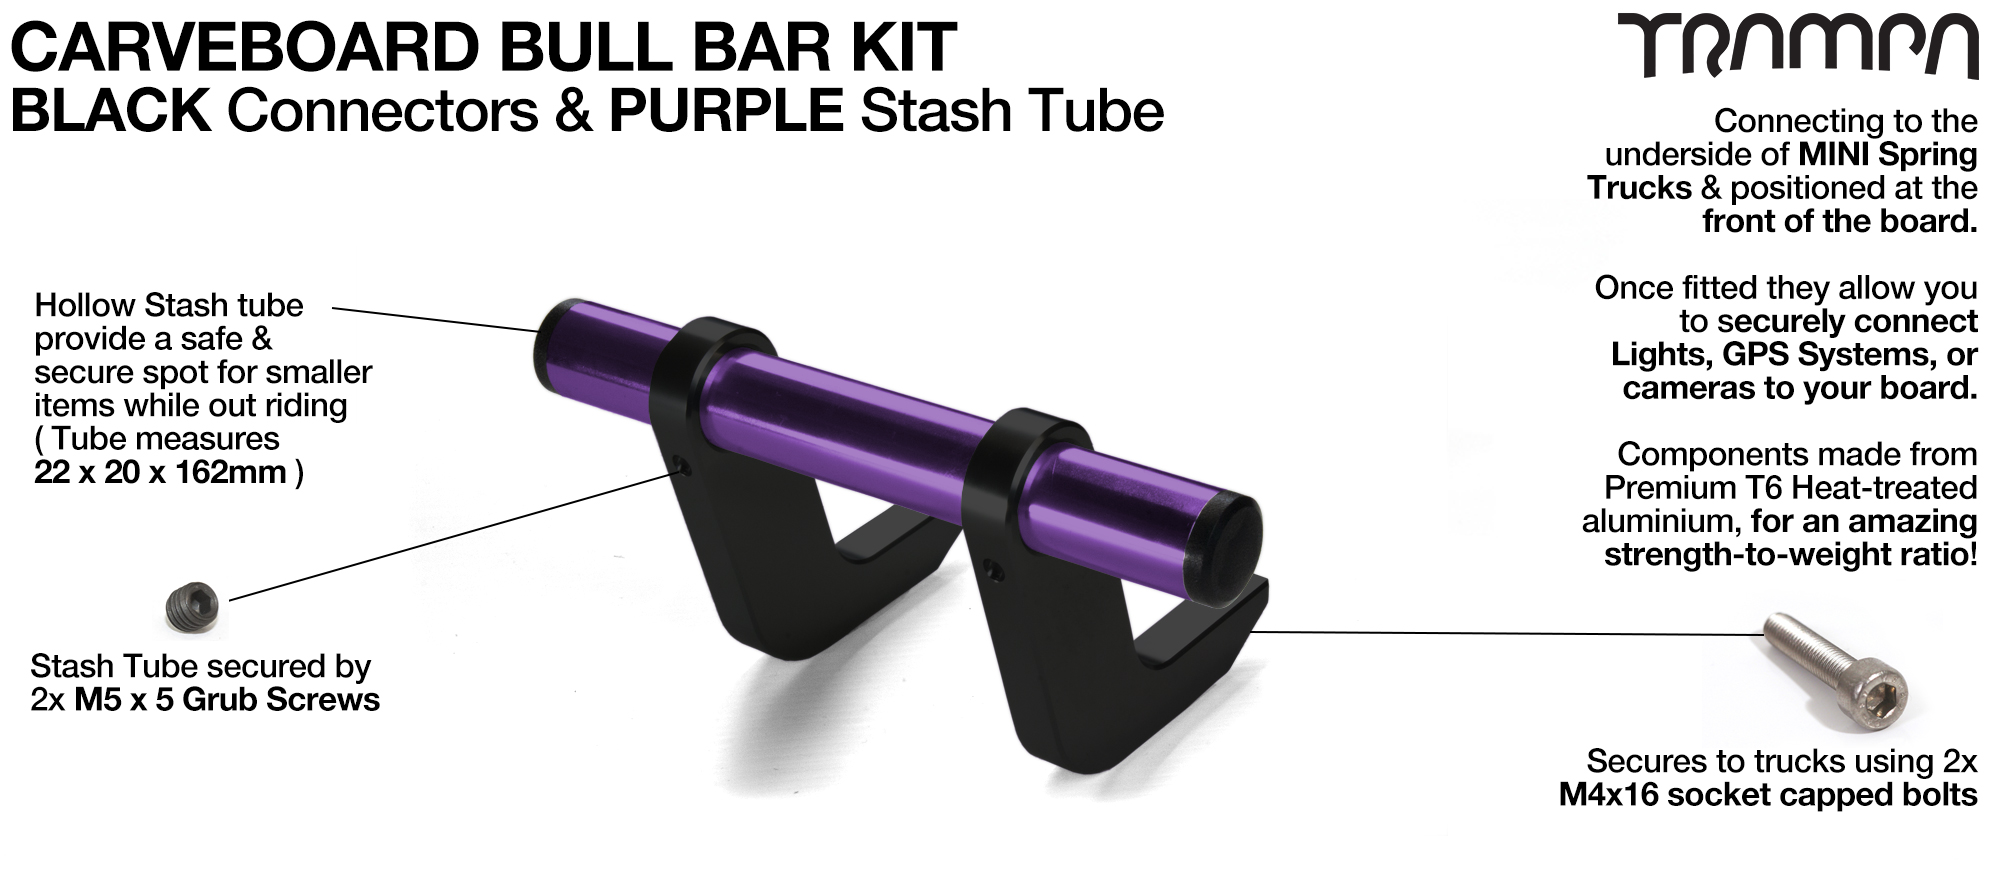 BLACK Uprights & PURPLE Crossbar BULL BARS for CARVE BOARDS using T6 Heat Treated CNC'd AluminIum Clamps, Hollow Aluminium Stash Tubes with Rubber end bungs 